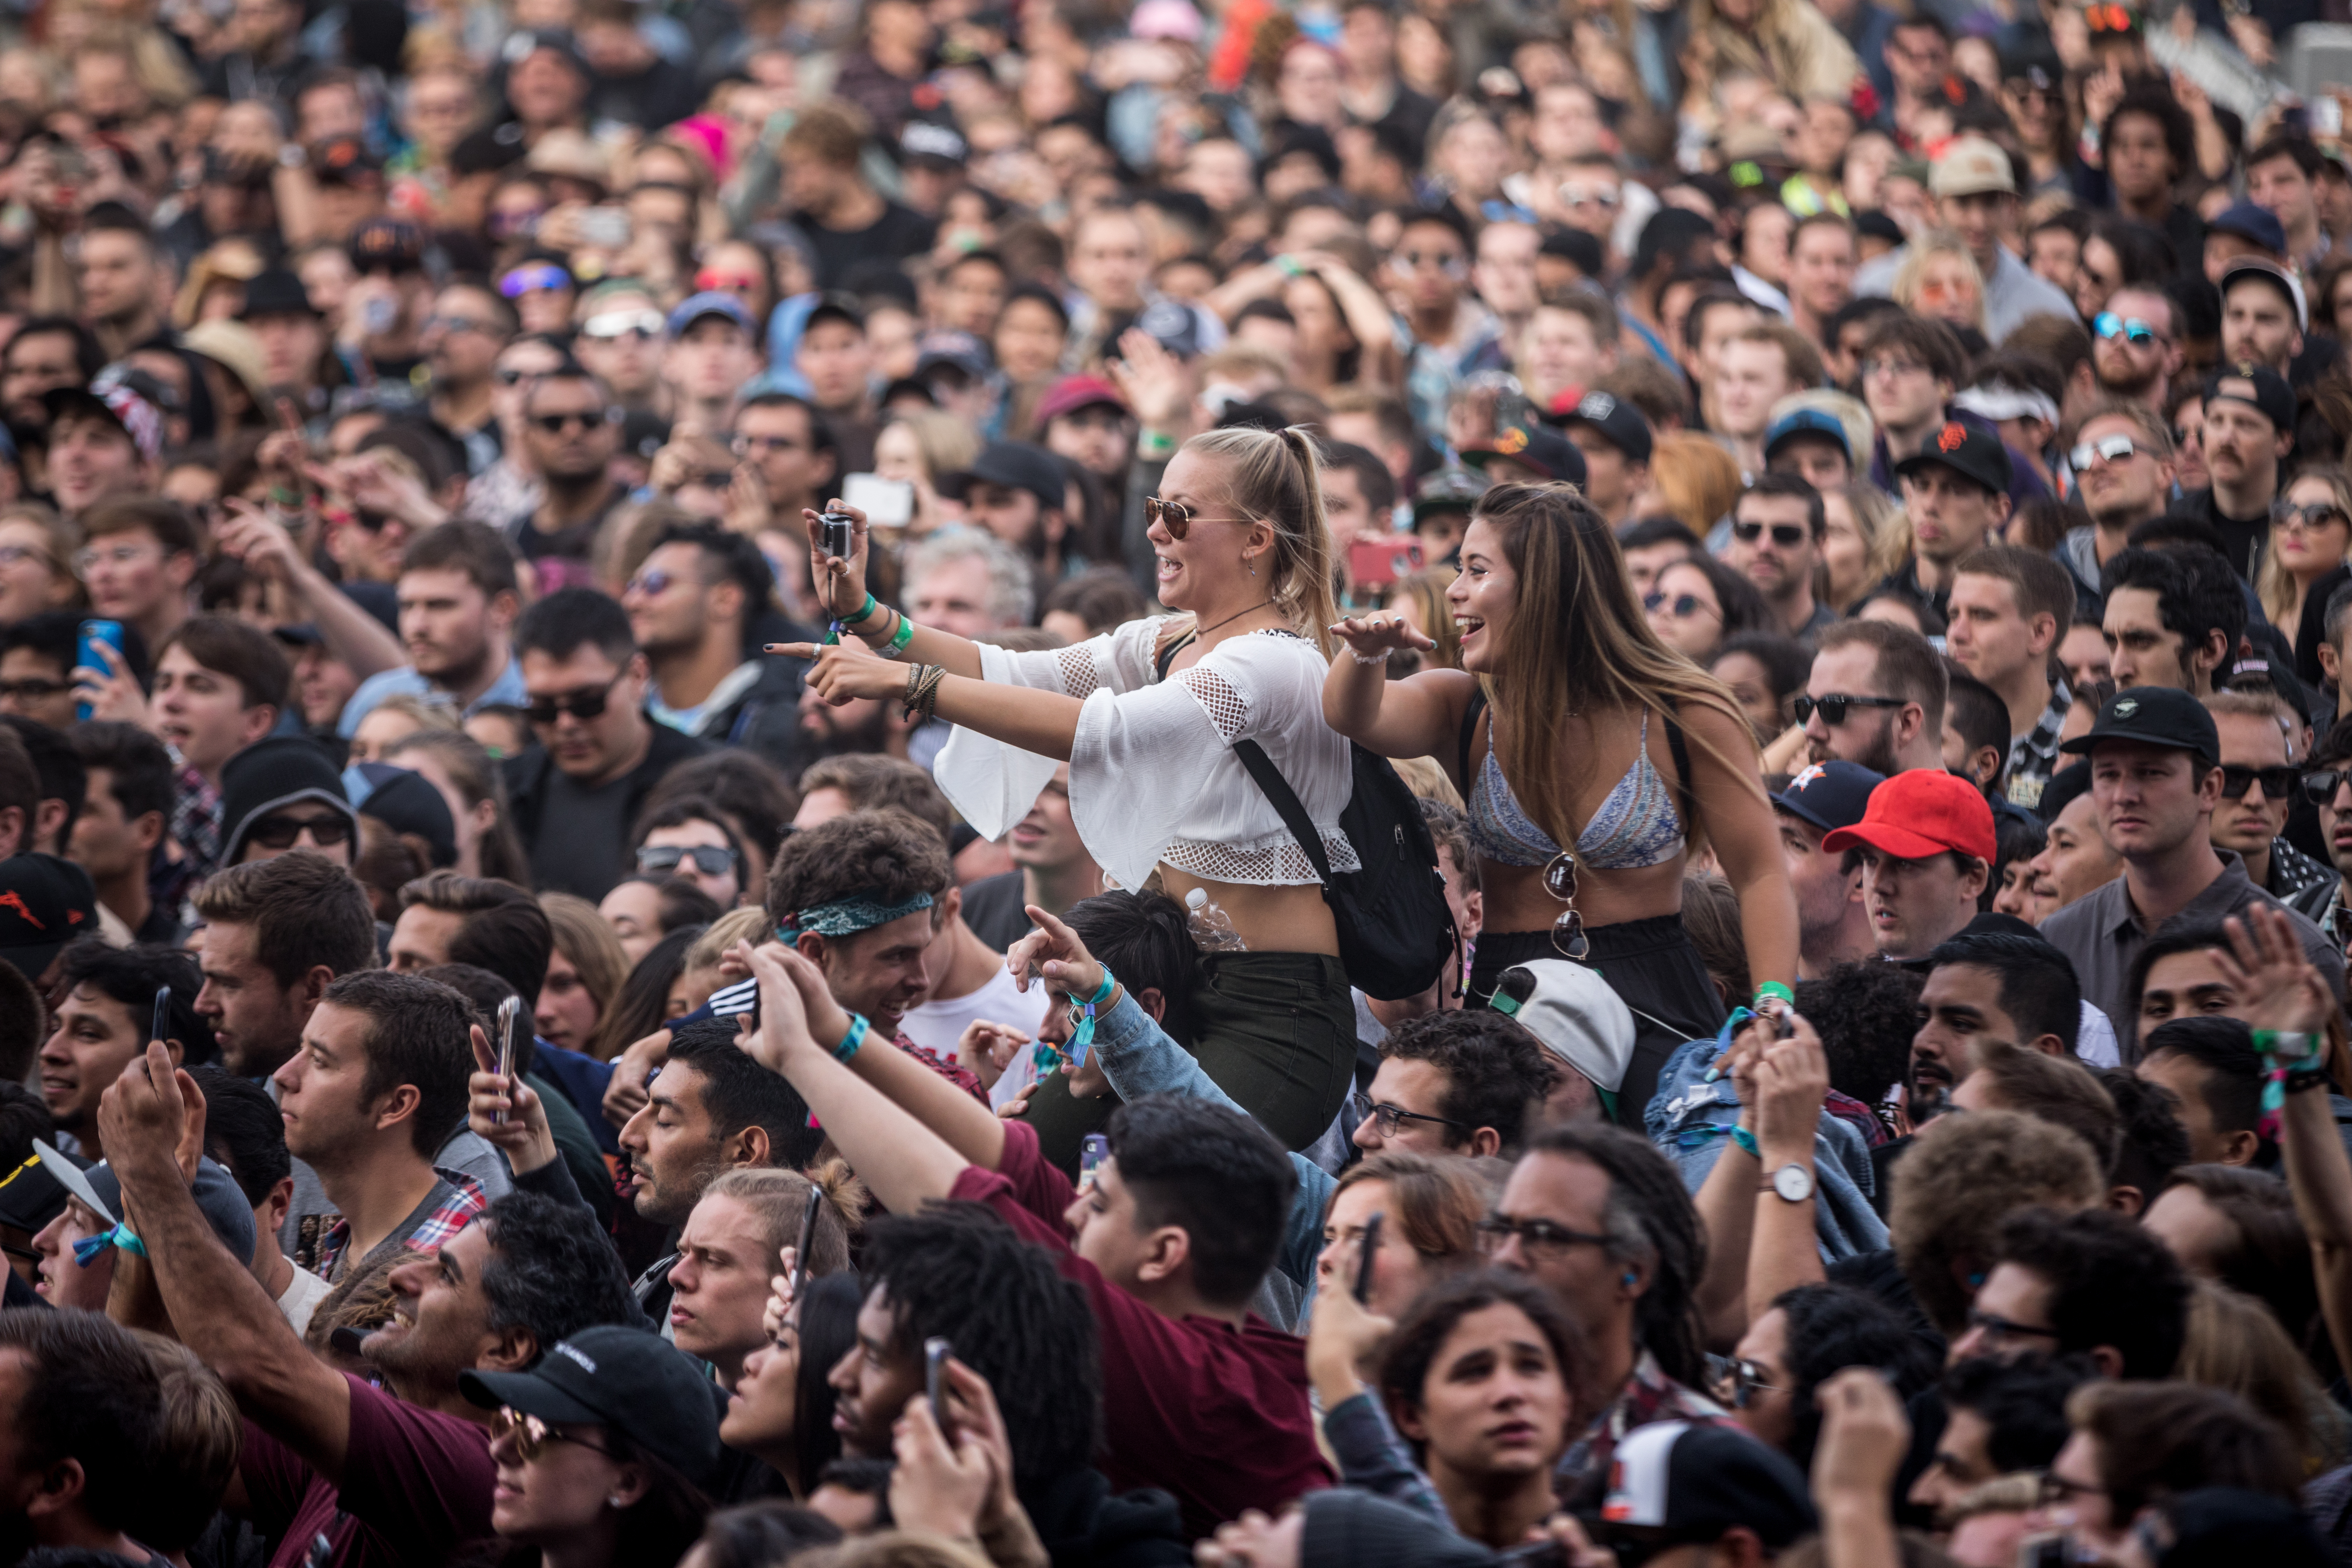 Shot of the crowd at Outside Lands 2017, filled with a lot of young people with their hands in the air.